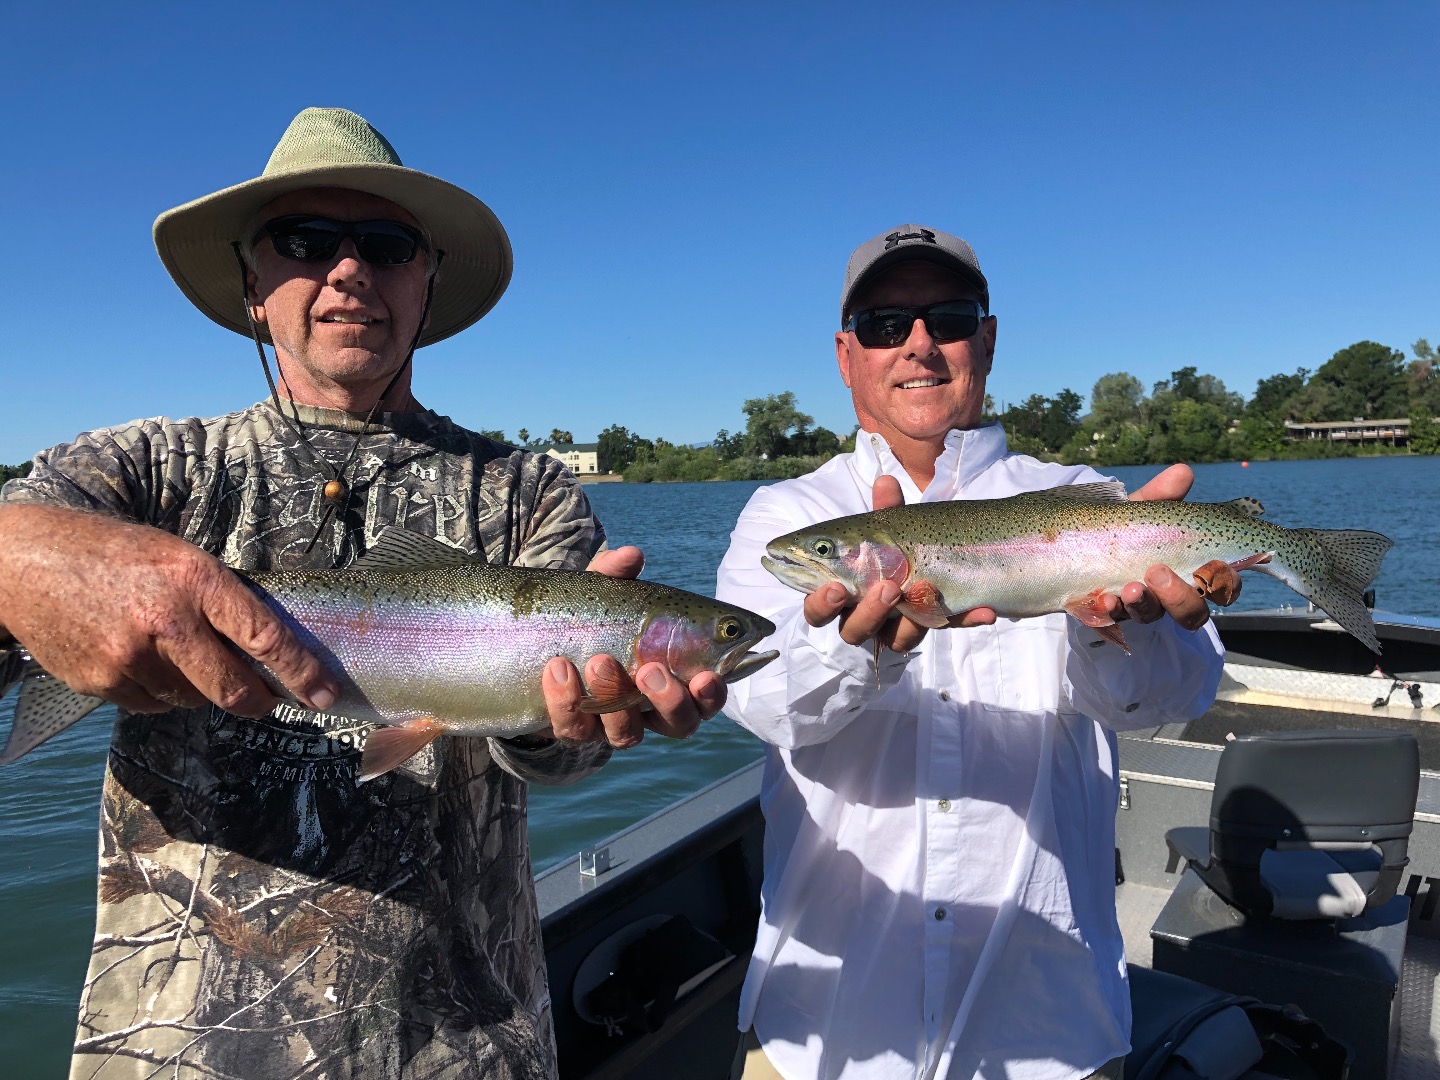 Redding trout keeping anglers busy!